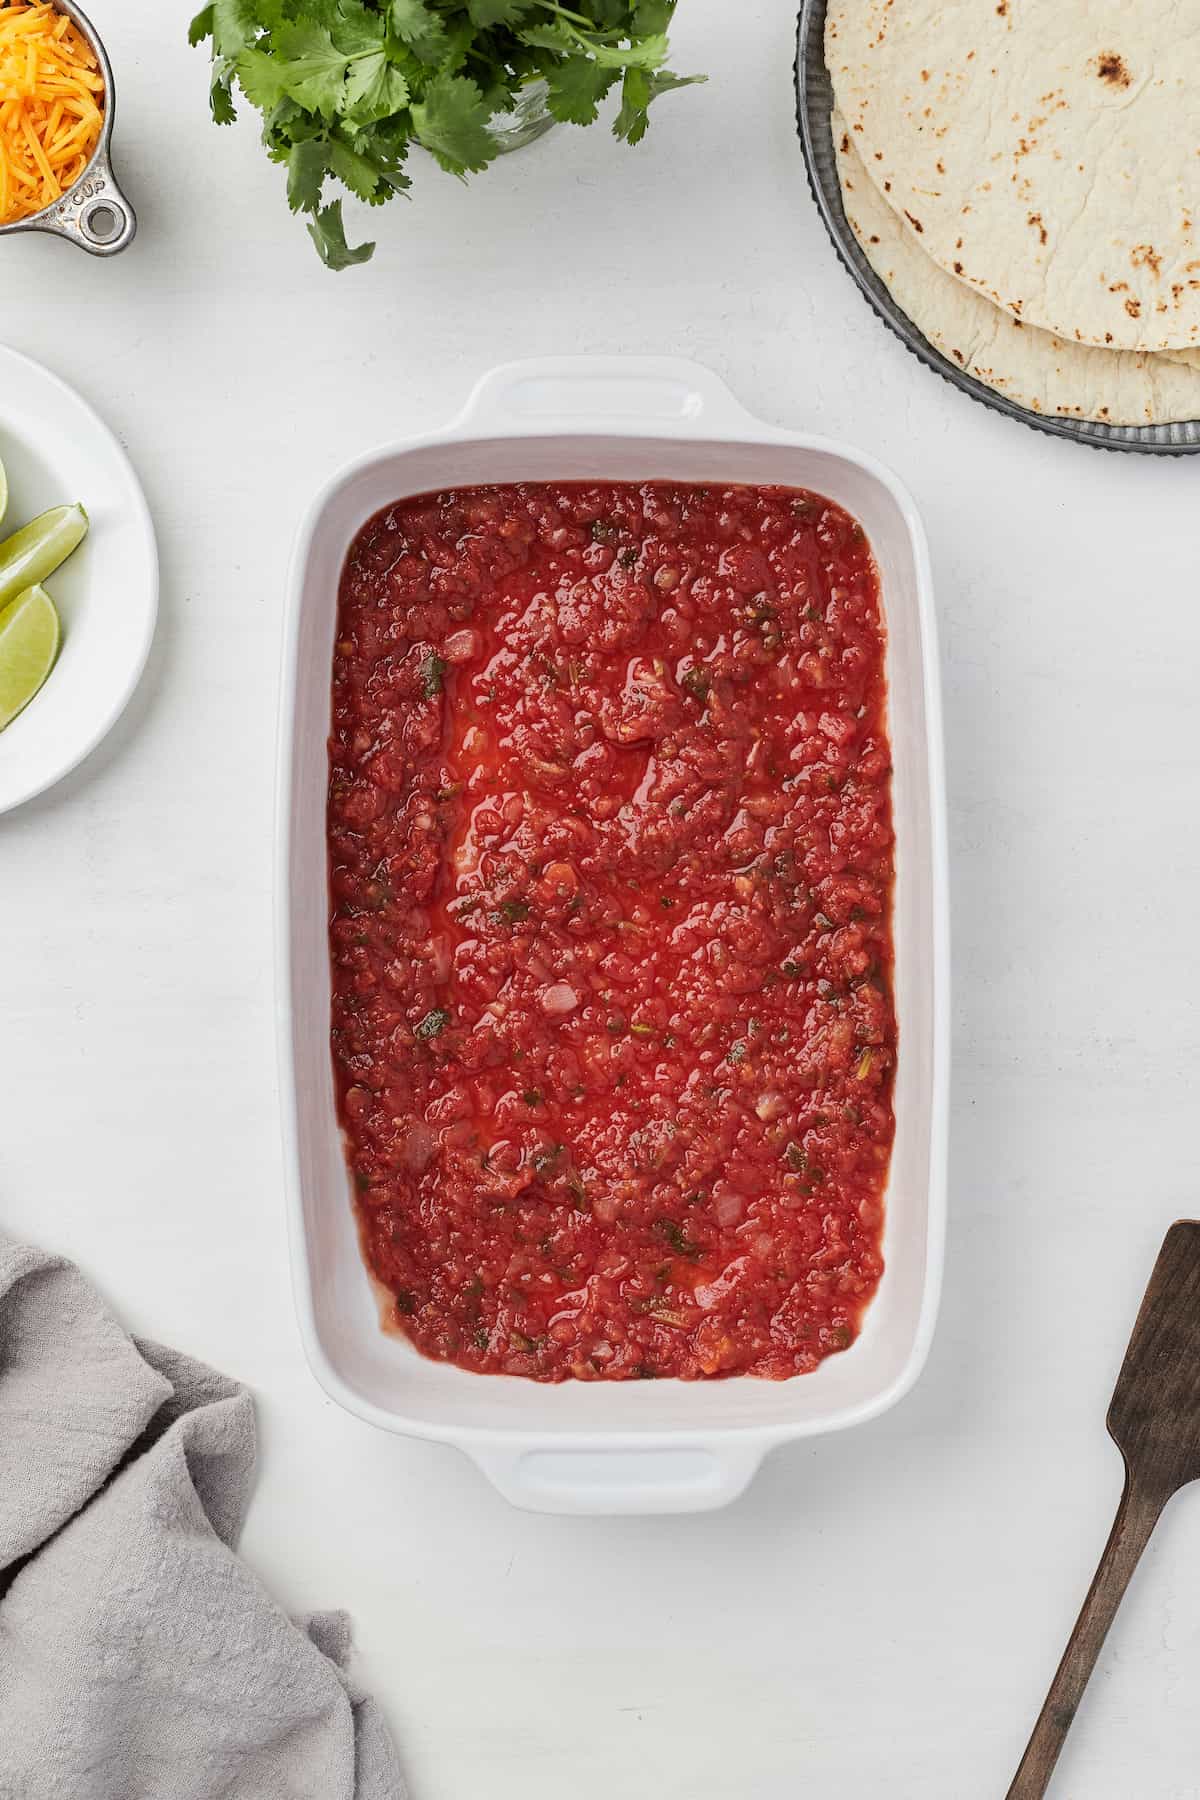 Chunky red salsa spread evenly into the bottom of a 9x13-inch baking dish